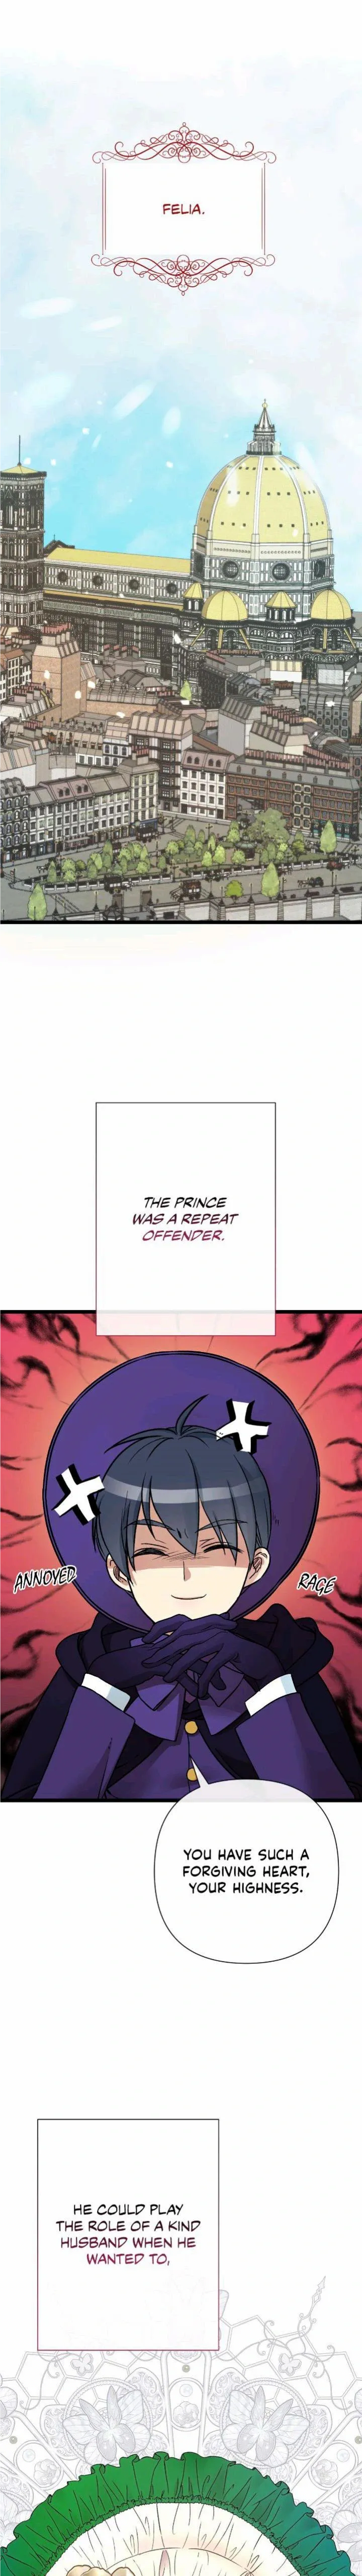 The Problematic Prince - Page 1